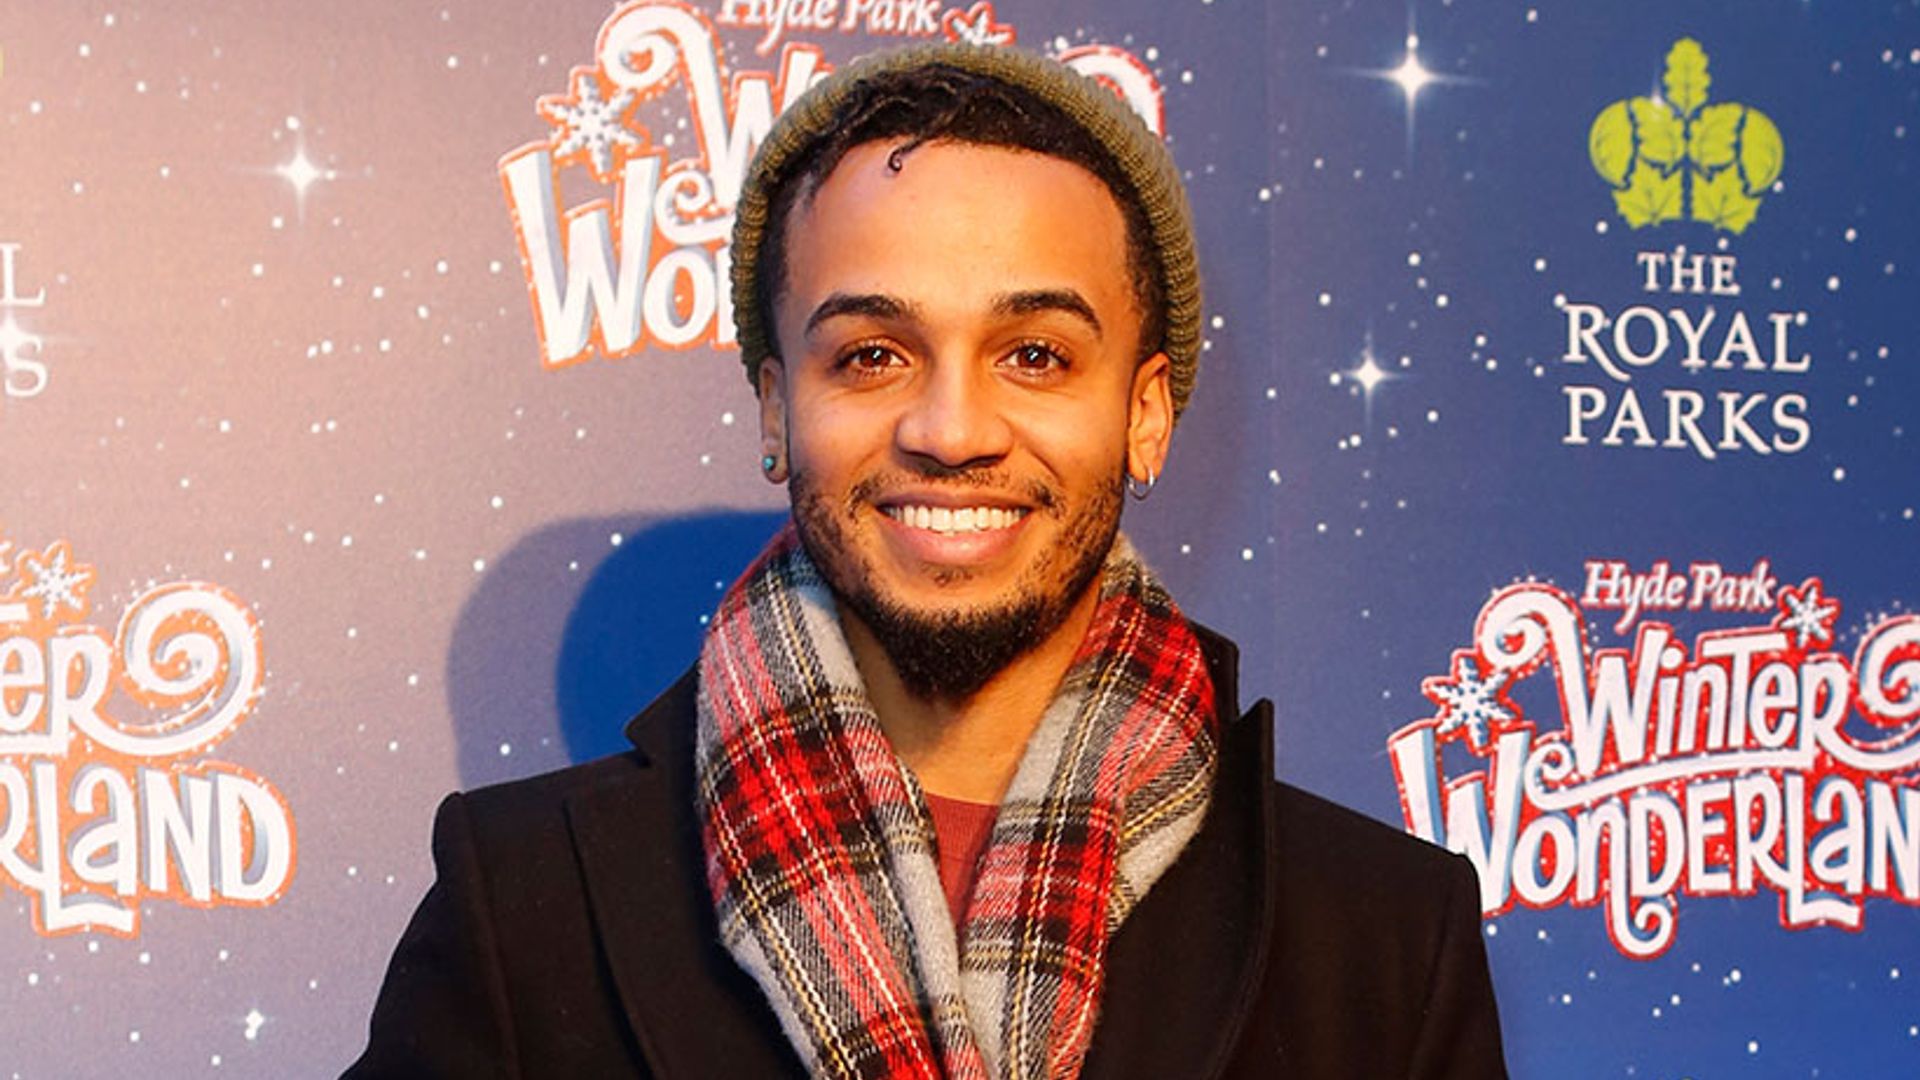 Strictly Come Dancing: Who is Aston Merrygold rooting for now?